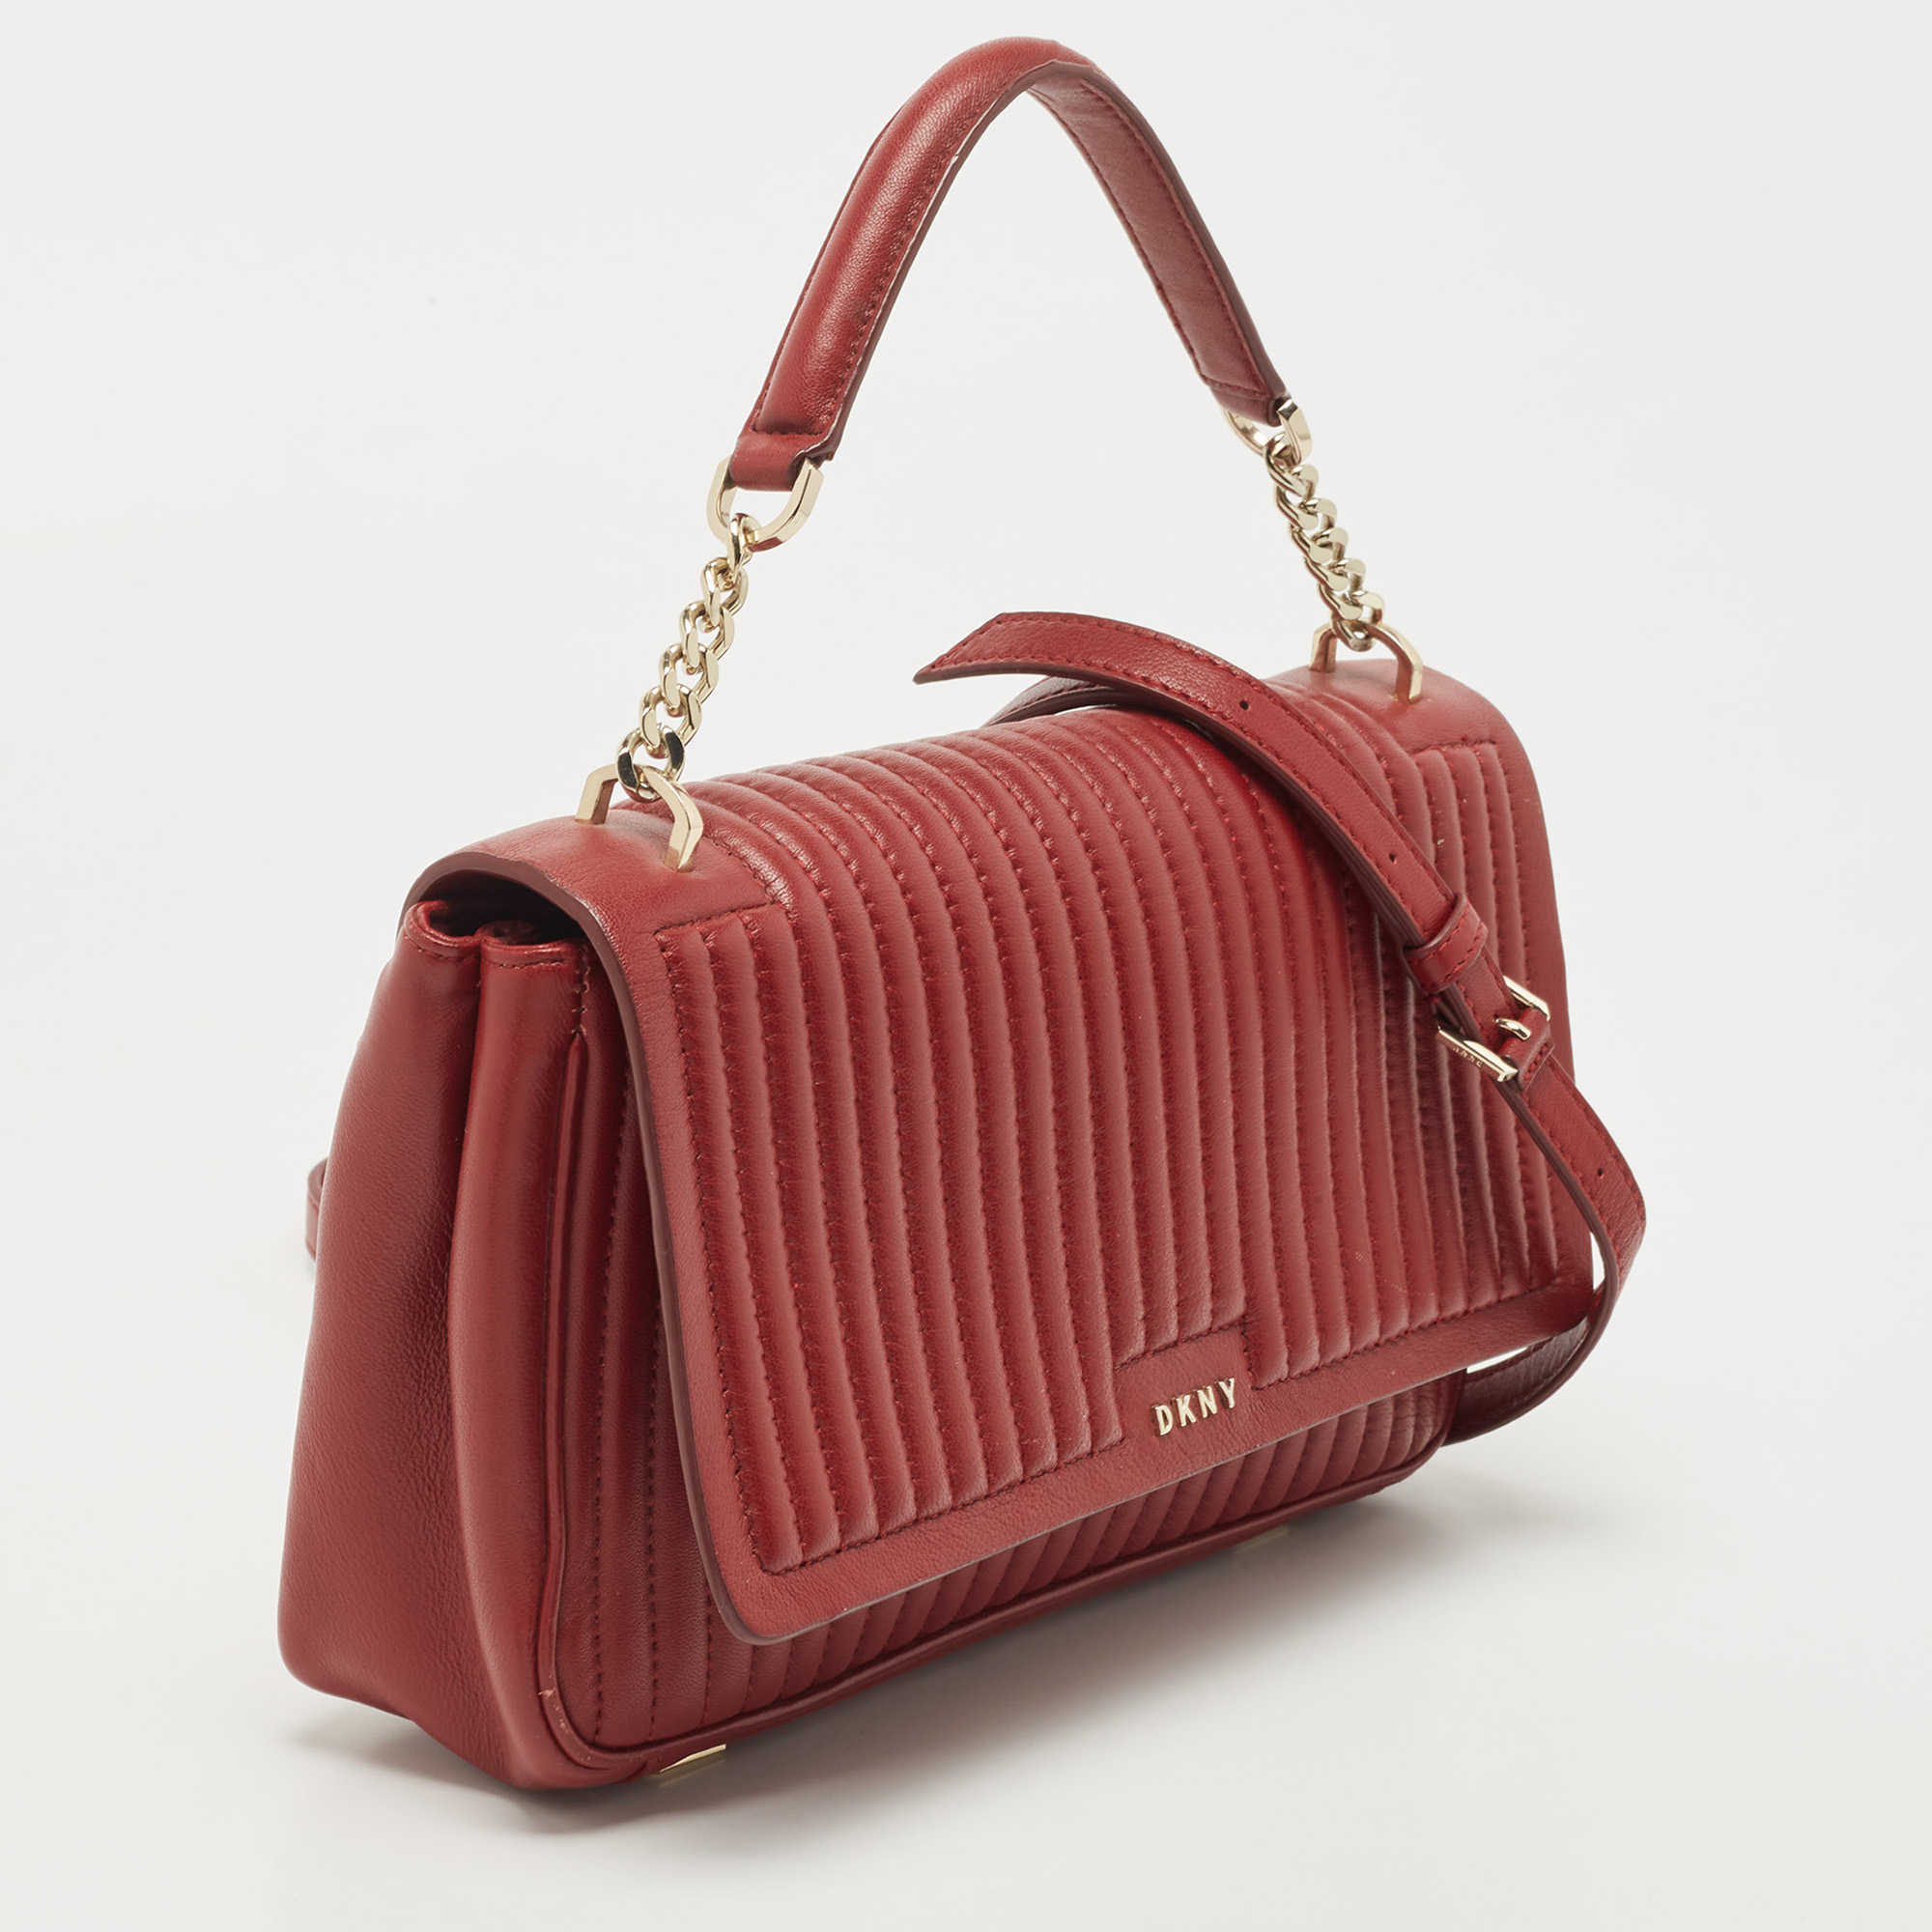 DKNY Red Pinstripe Quilted Leather Gansevoort Top Handle Bag